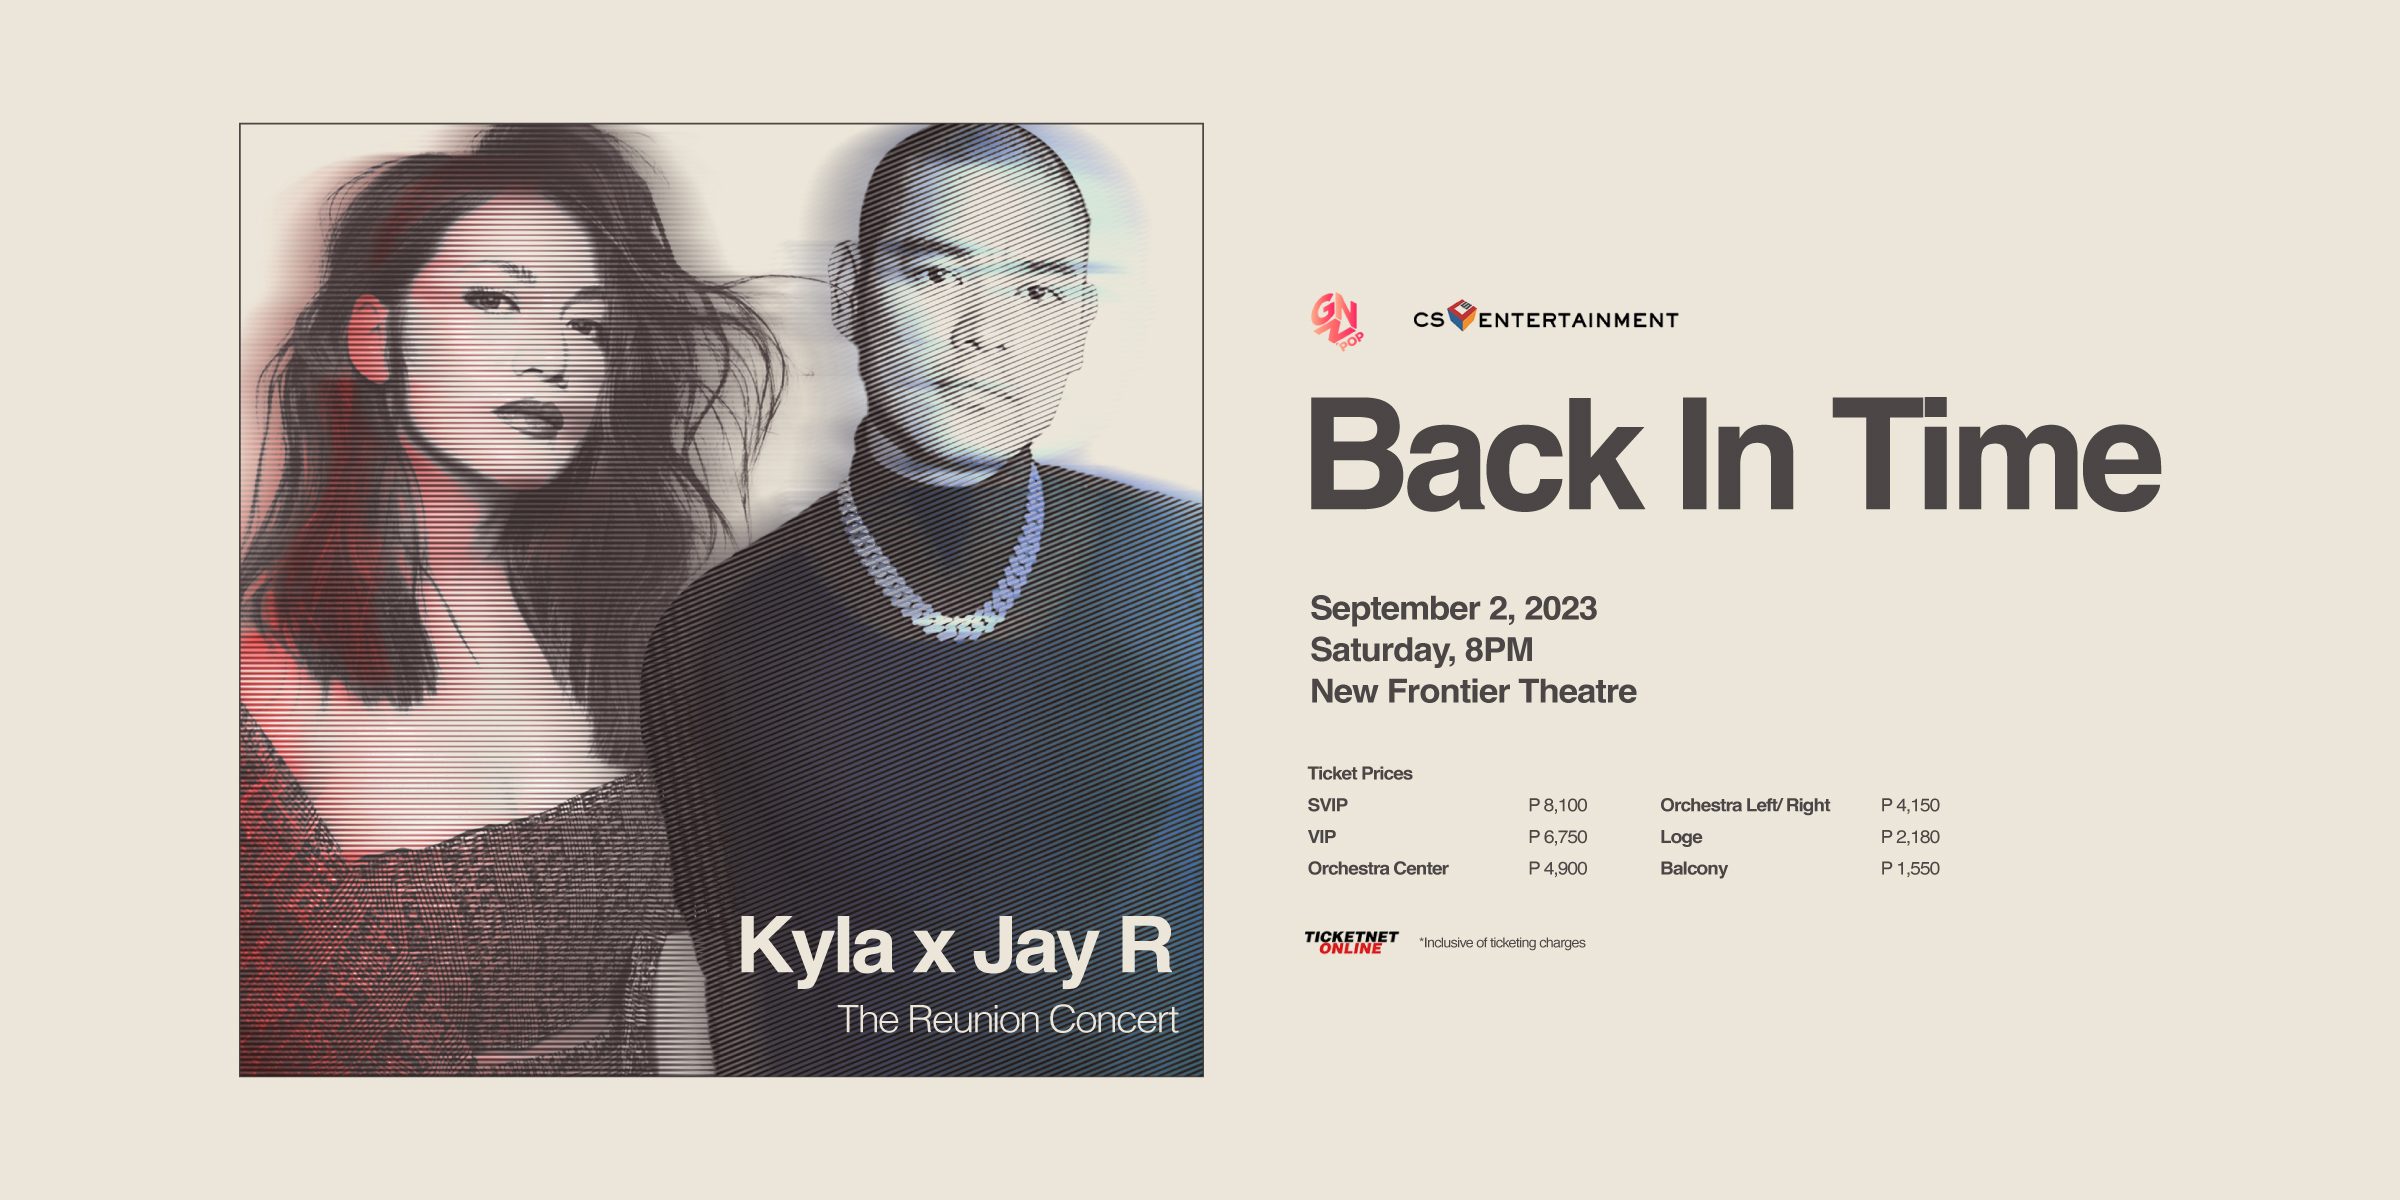 ‘Back in Time:’ R&B icons Kyla and Jay R reunite for concert